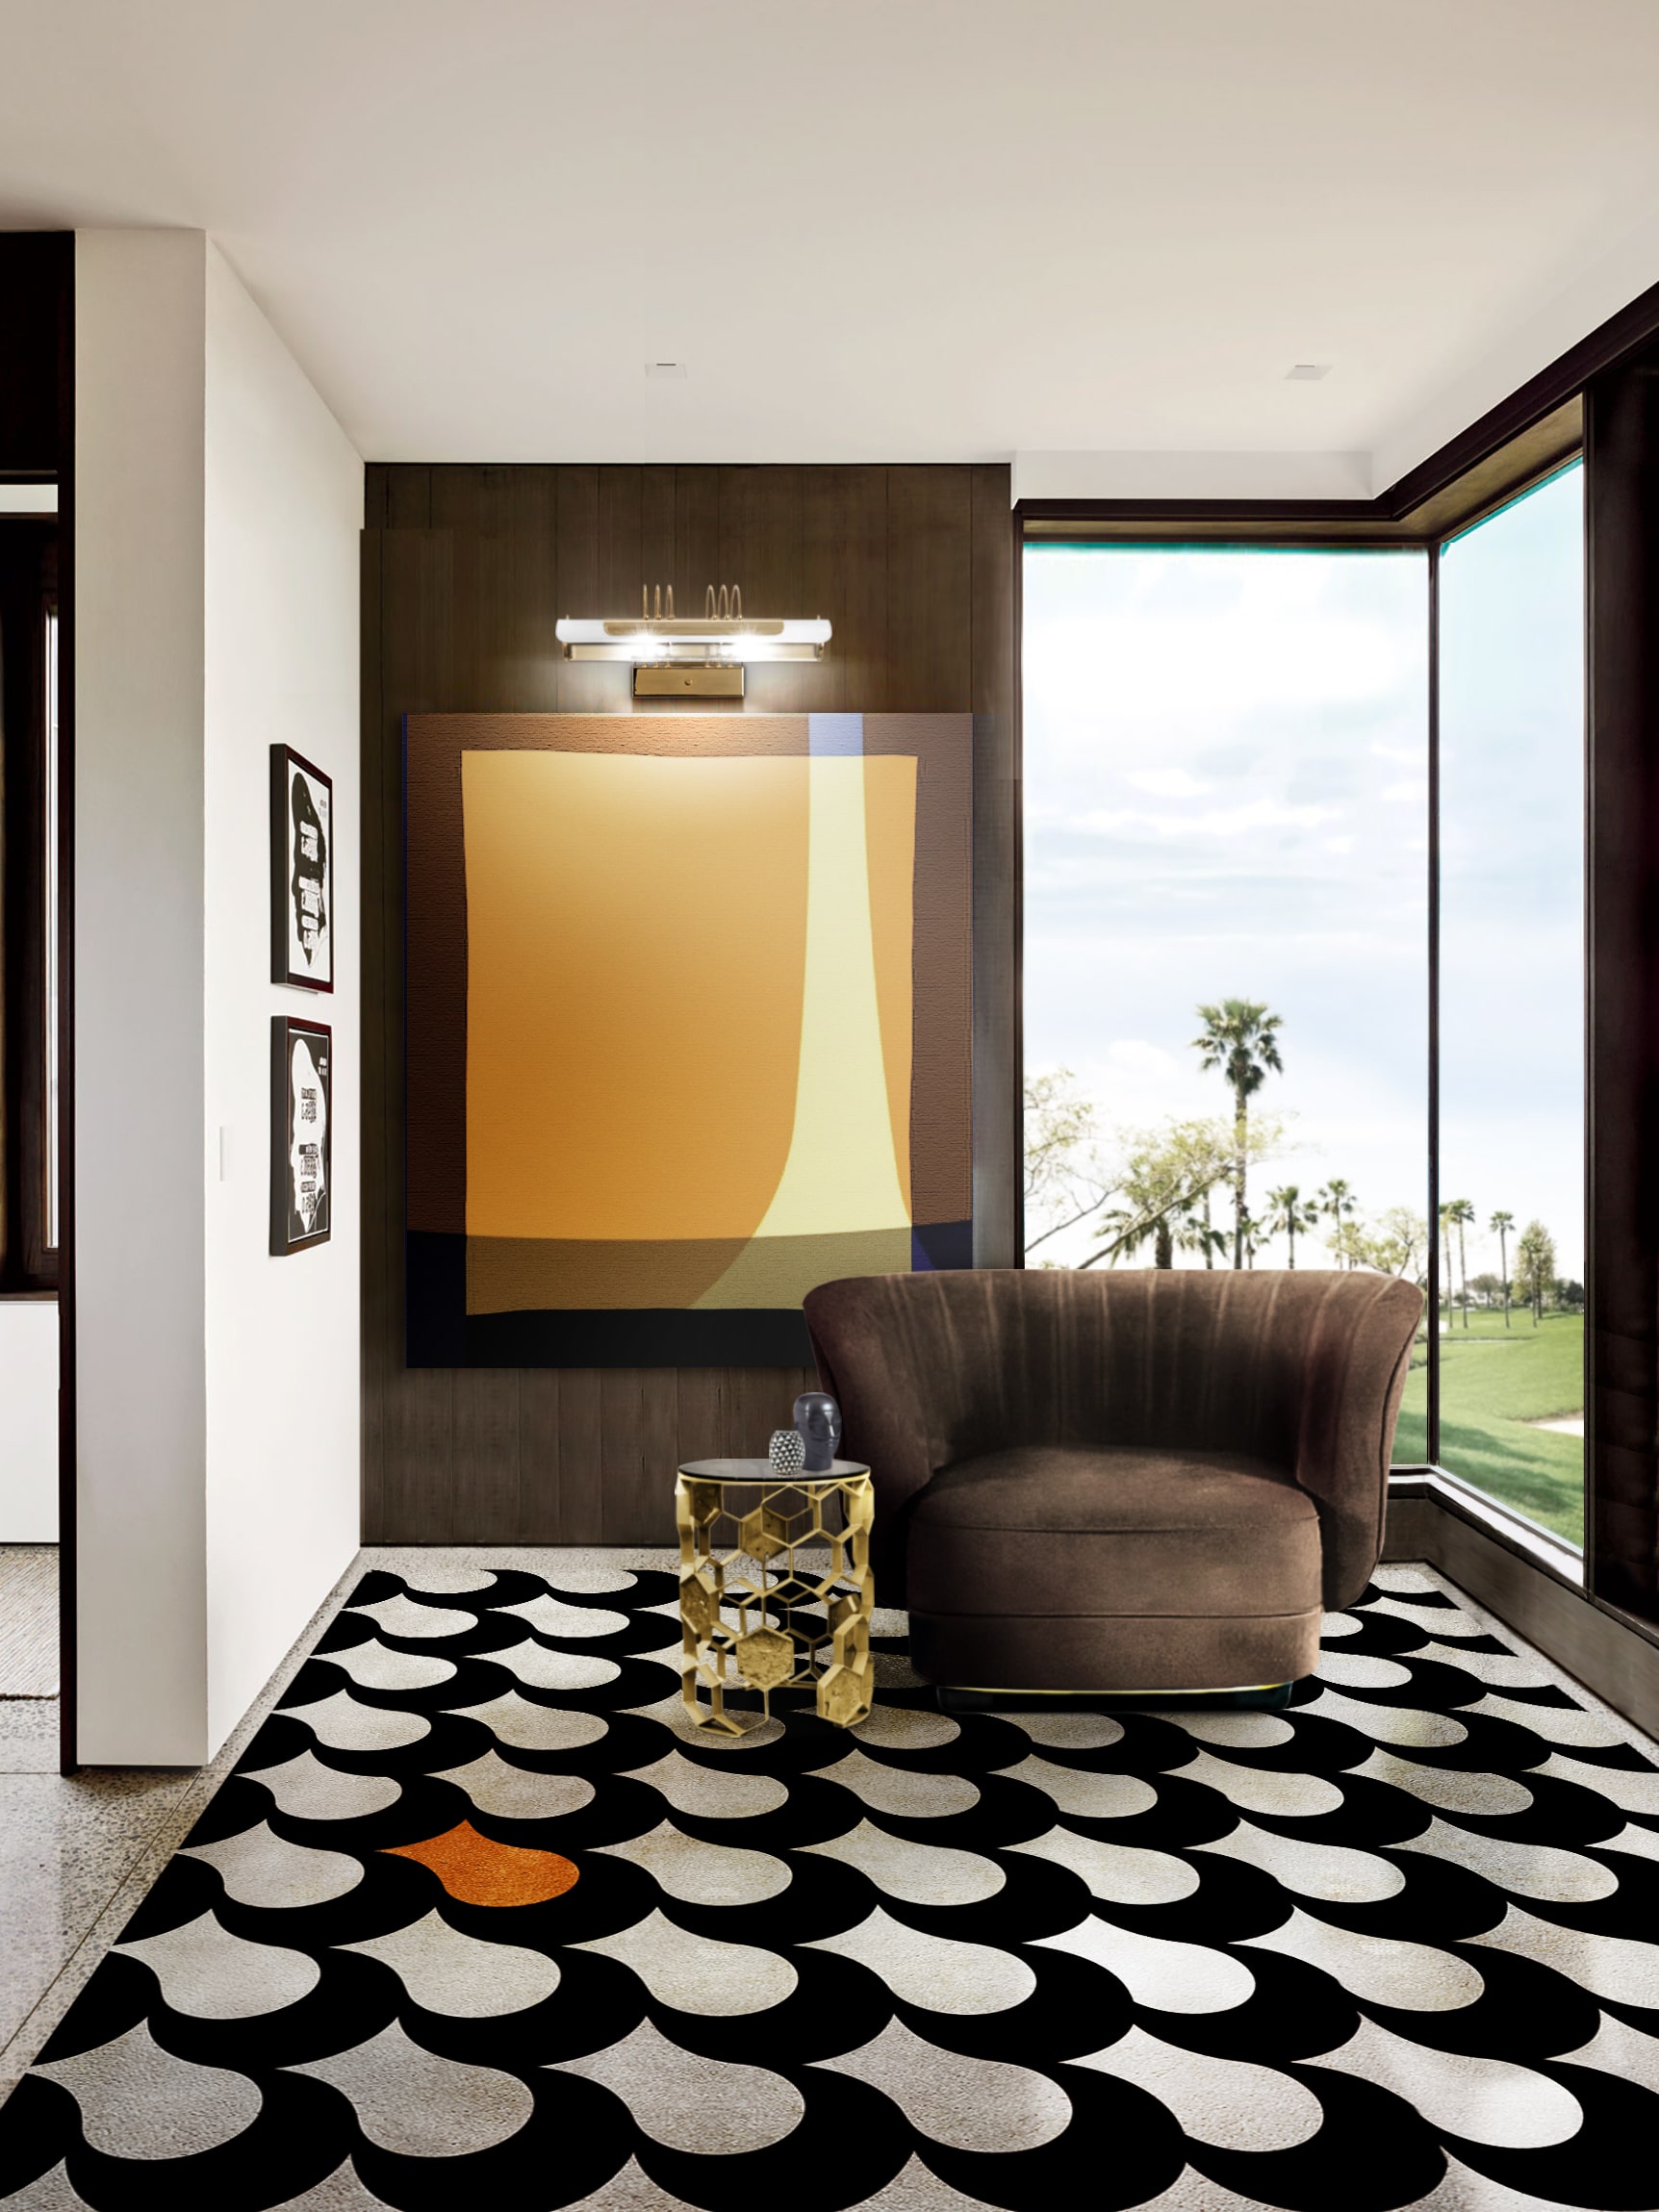 Modern Living Room Layout With Bold Game of Patterns and Contrast - Home'Society